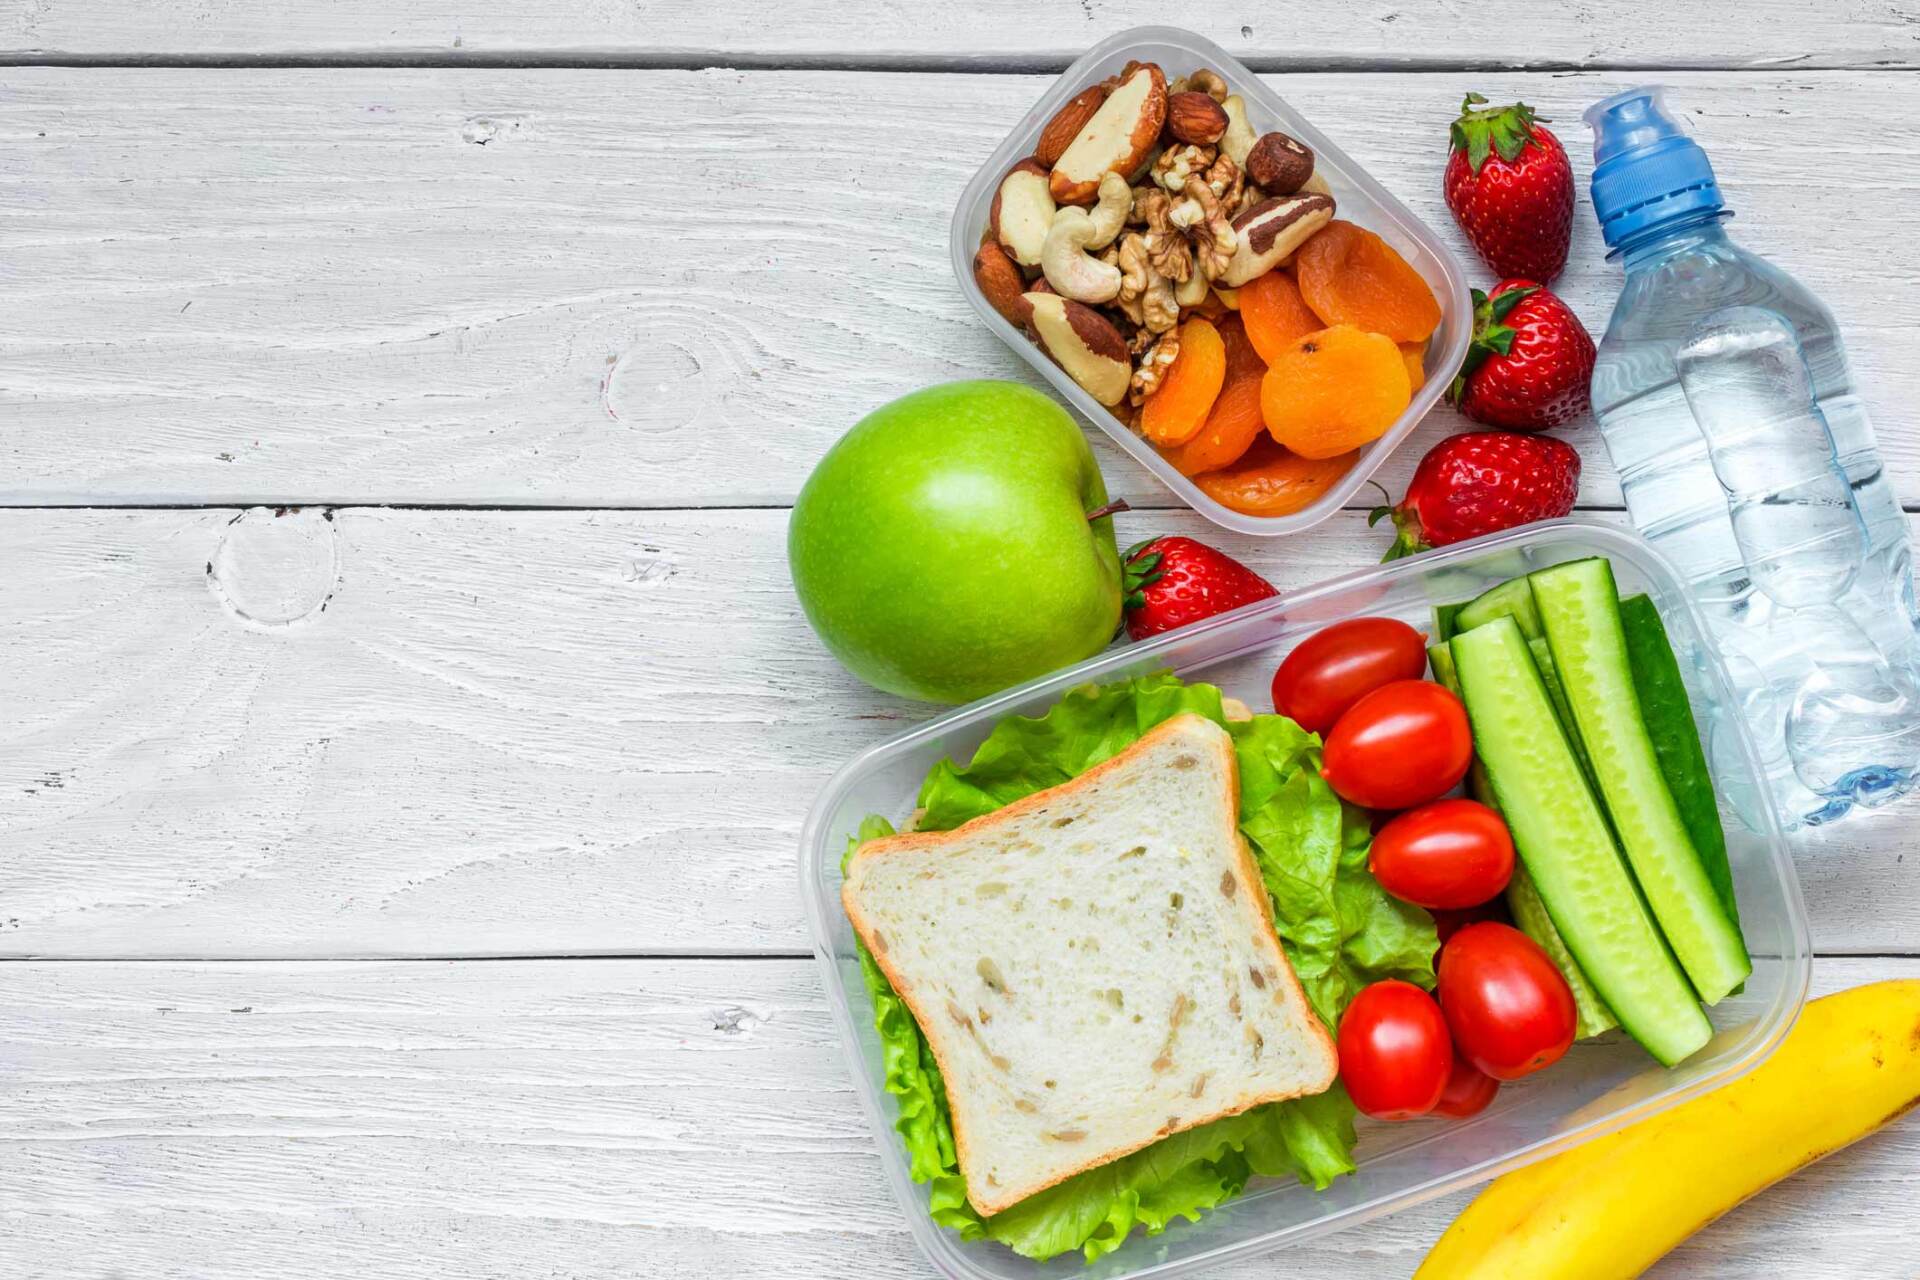 School Lunch Boxes With Sandwich And Fresh Vegetables - Warren, MI - Maple Lane Pest Control